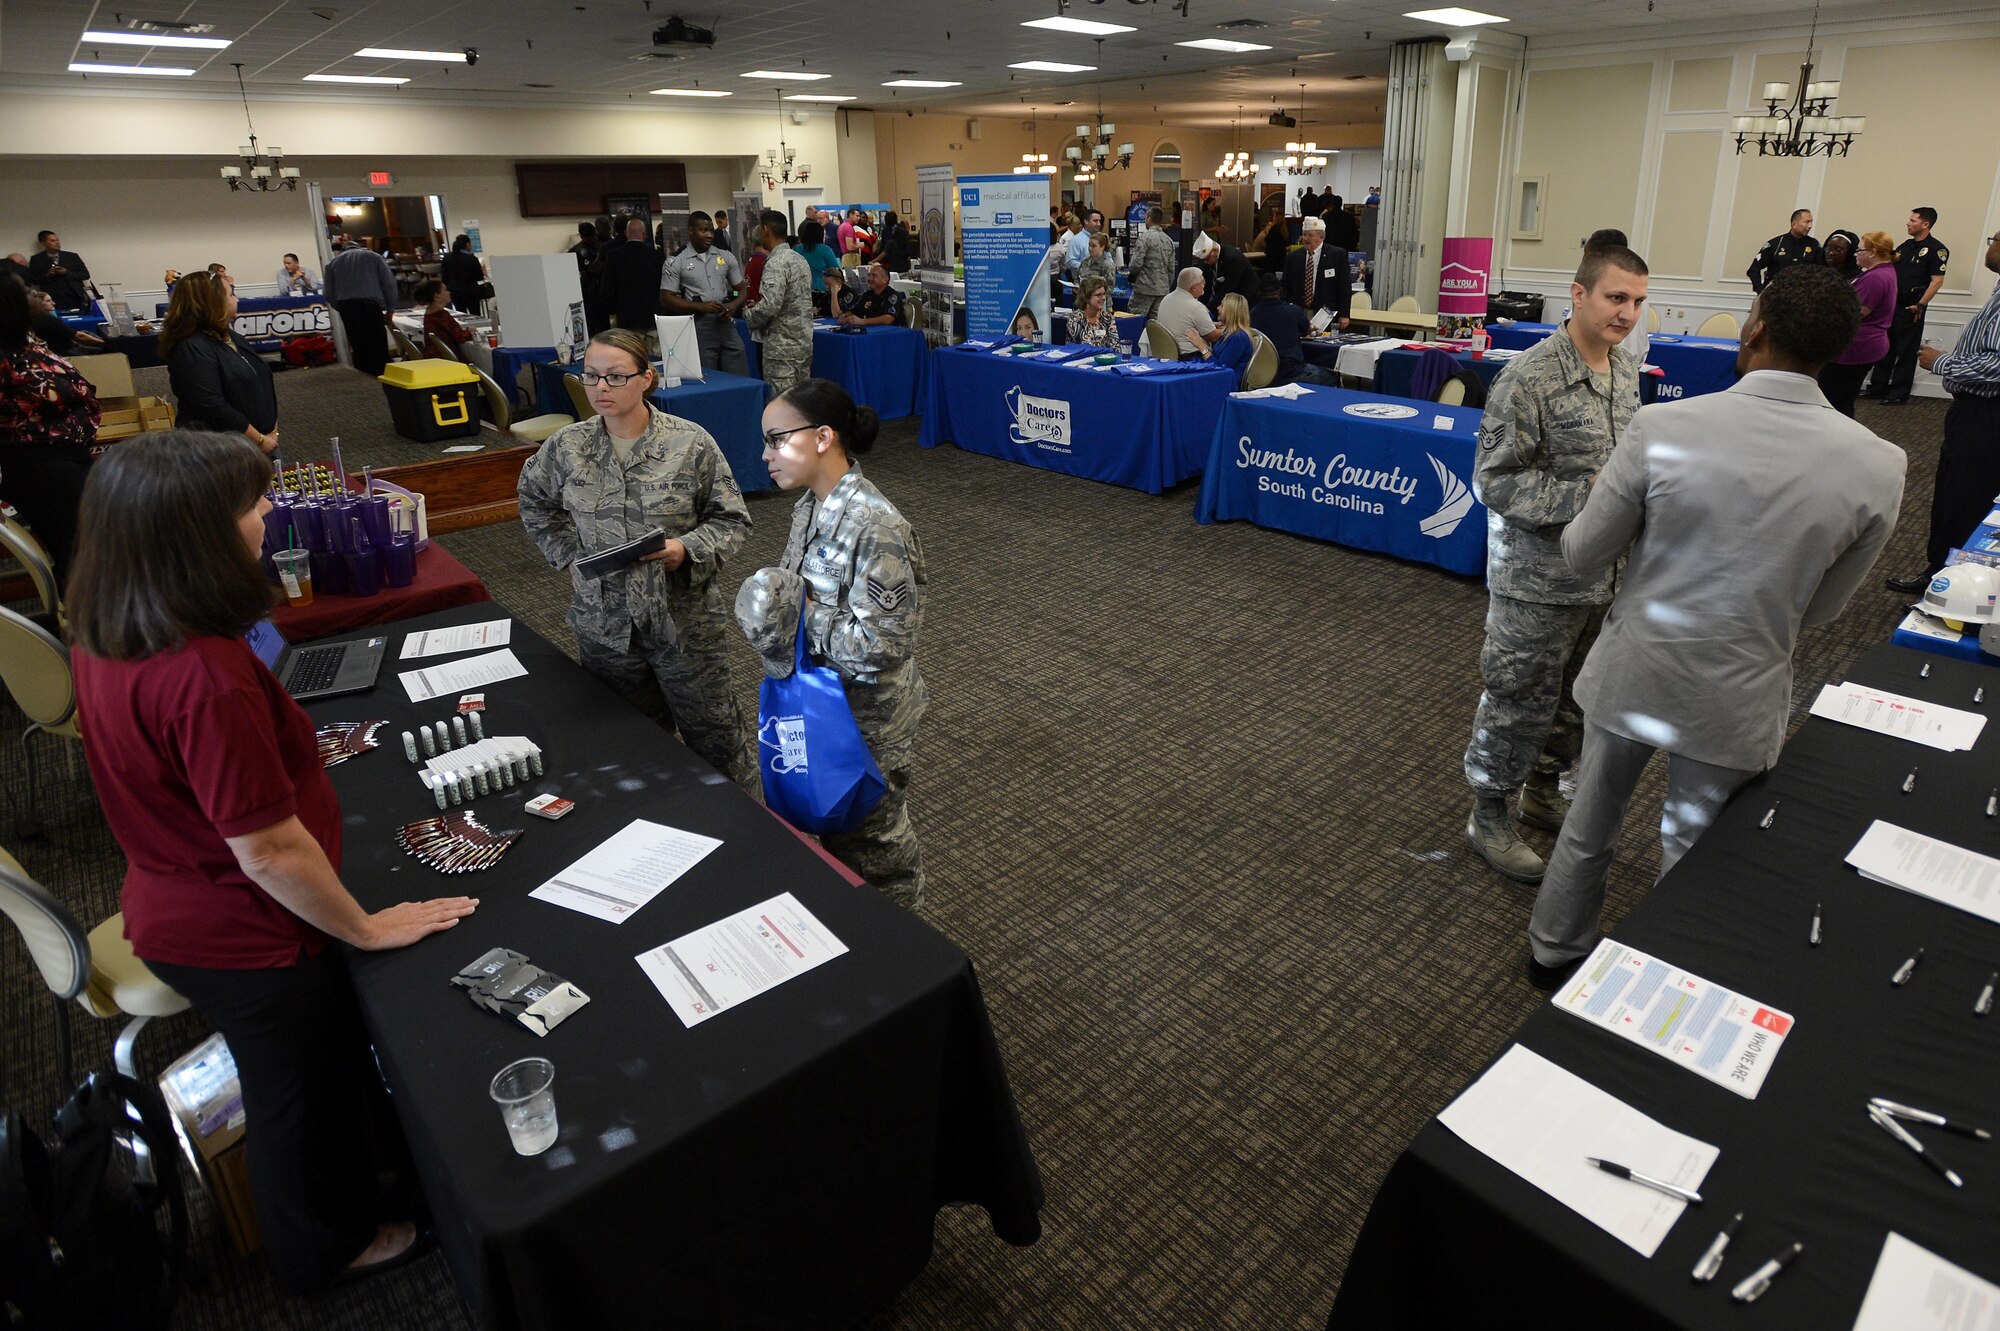 Team Shaw members speak with representatives from local businesses and universities at the 20th Force Support Squadron’s annual Job and Education Fair at Shaw Air Force Base, S.C., Oct. 27, 2016. The goal of the fair is to connect job and education seekers with representatives from organizations in Sumter County to inform them about education opportunities and the job market in the local area. (U.S. Air Force photo by Senior Airman Zade Vadnais)